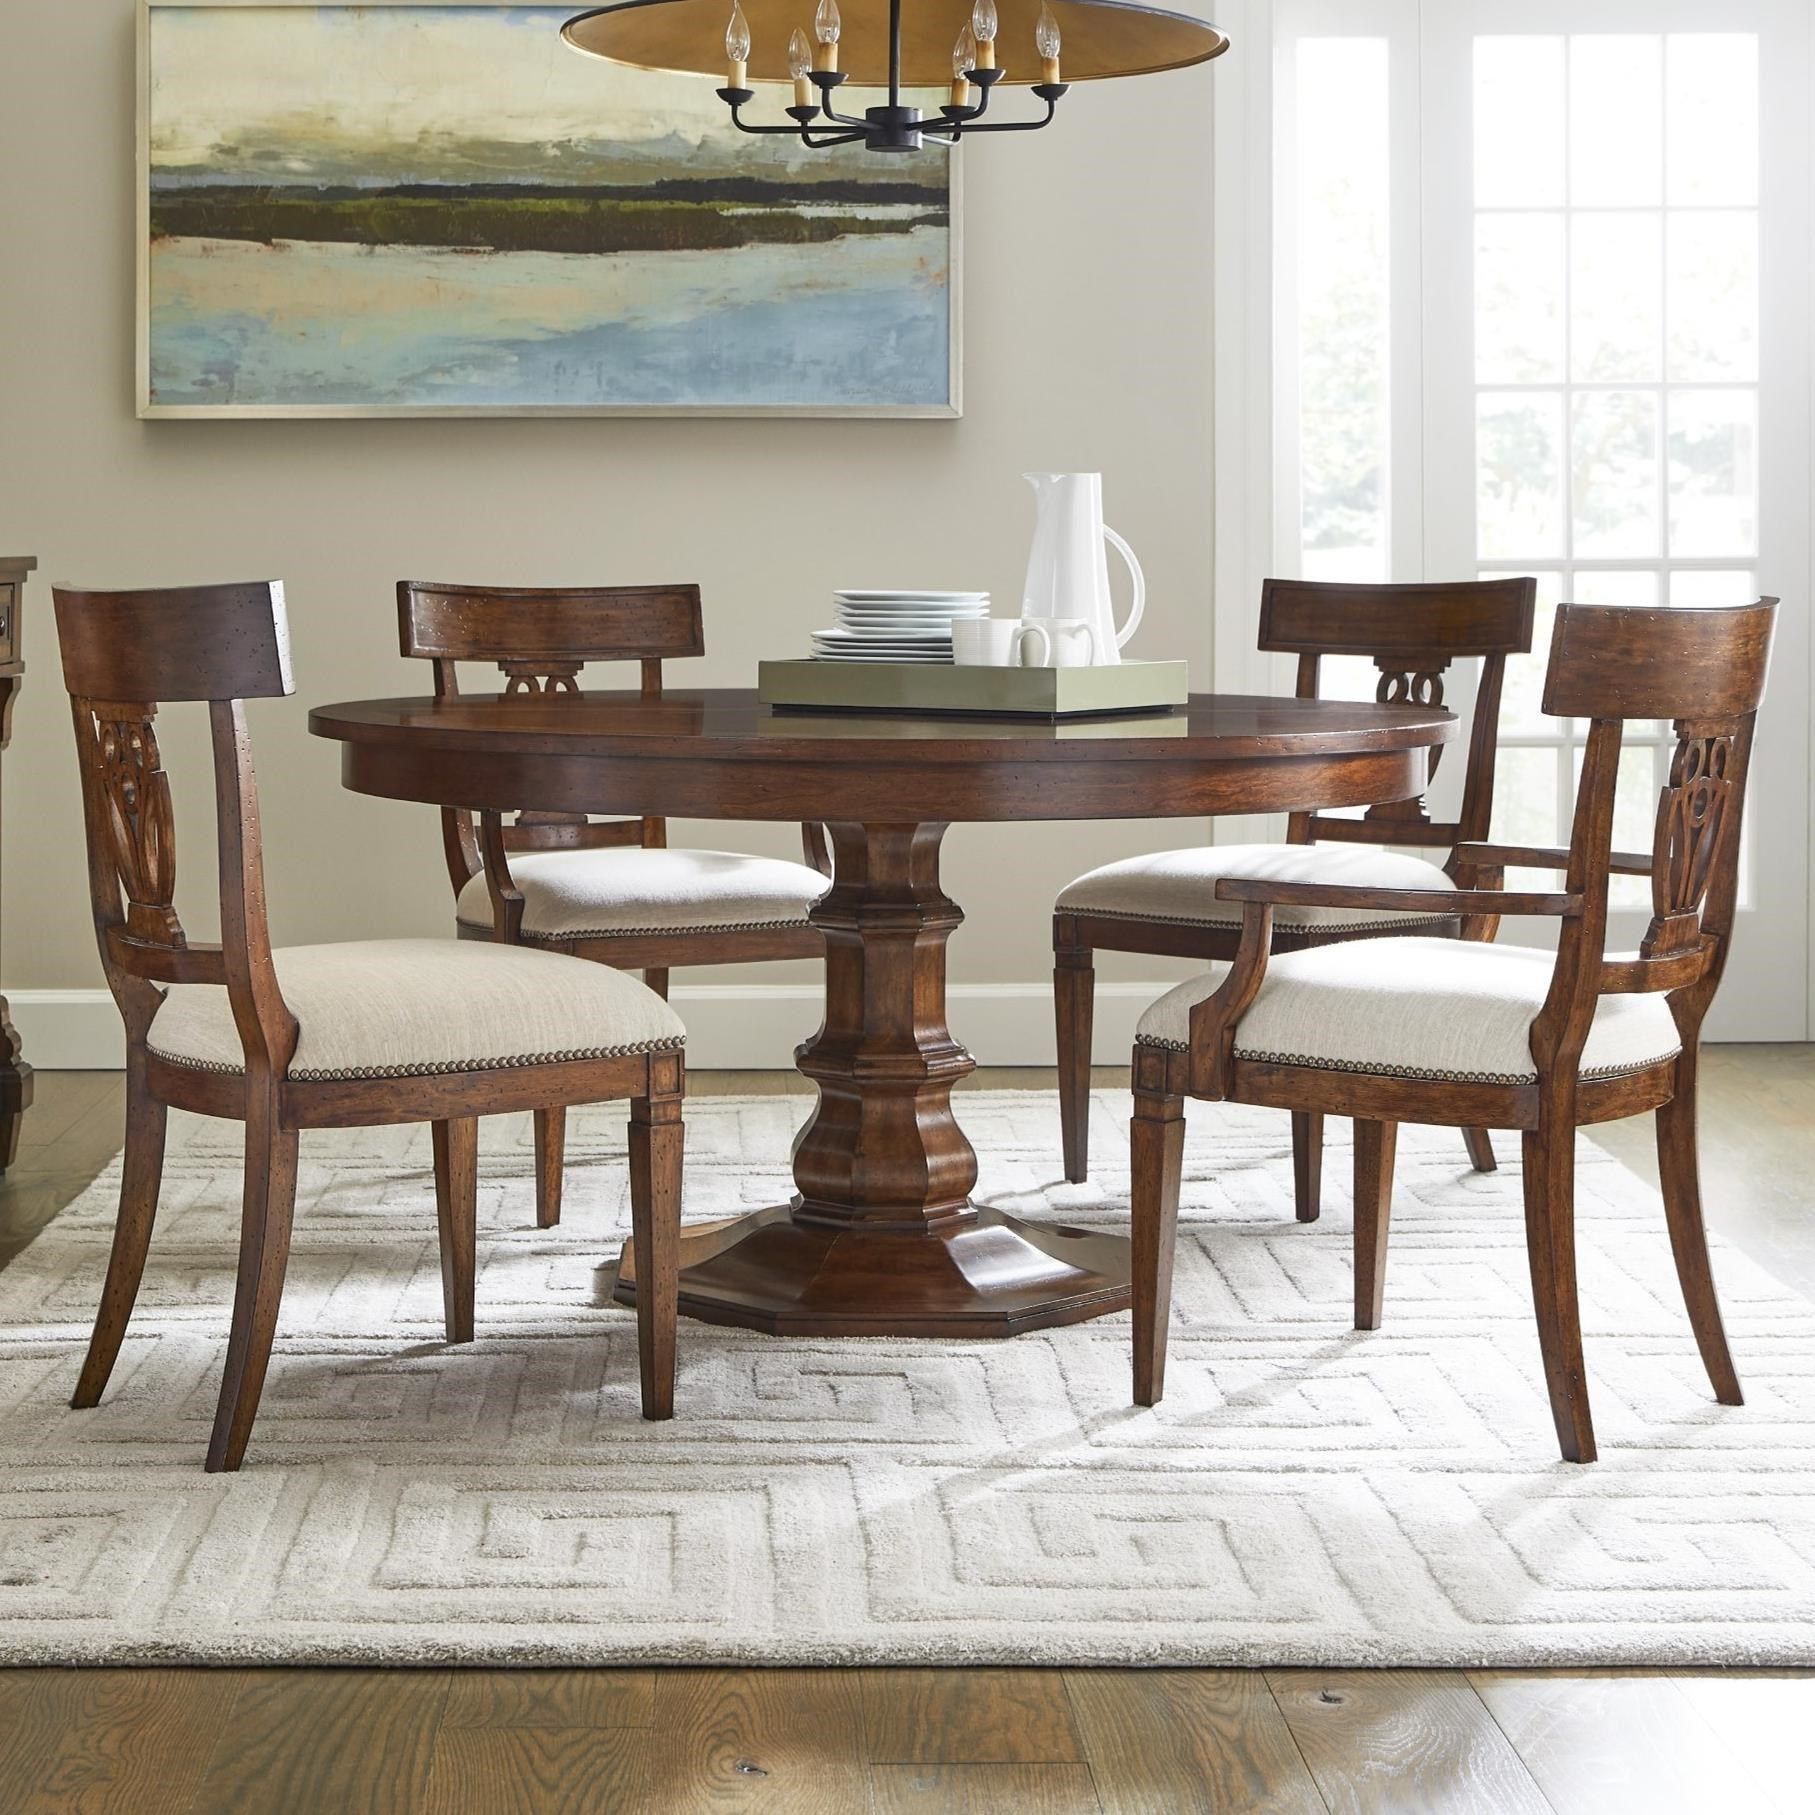 Stanley Furniture Old Town 5 Piece 54 Inch Round Dining Table Set Throughout 5 Piece Round Dining Sets (View 6 of 15)